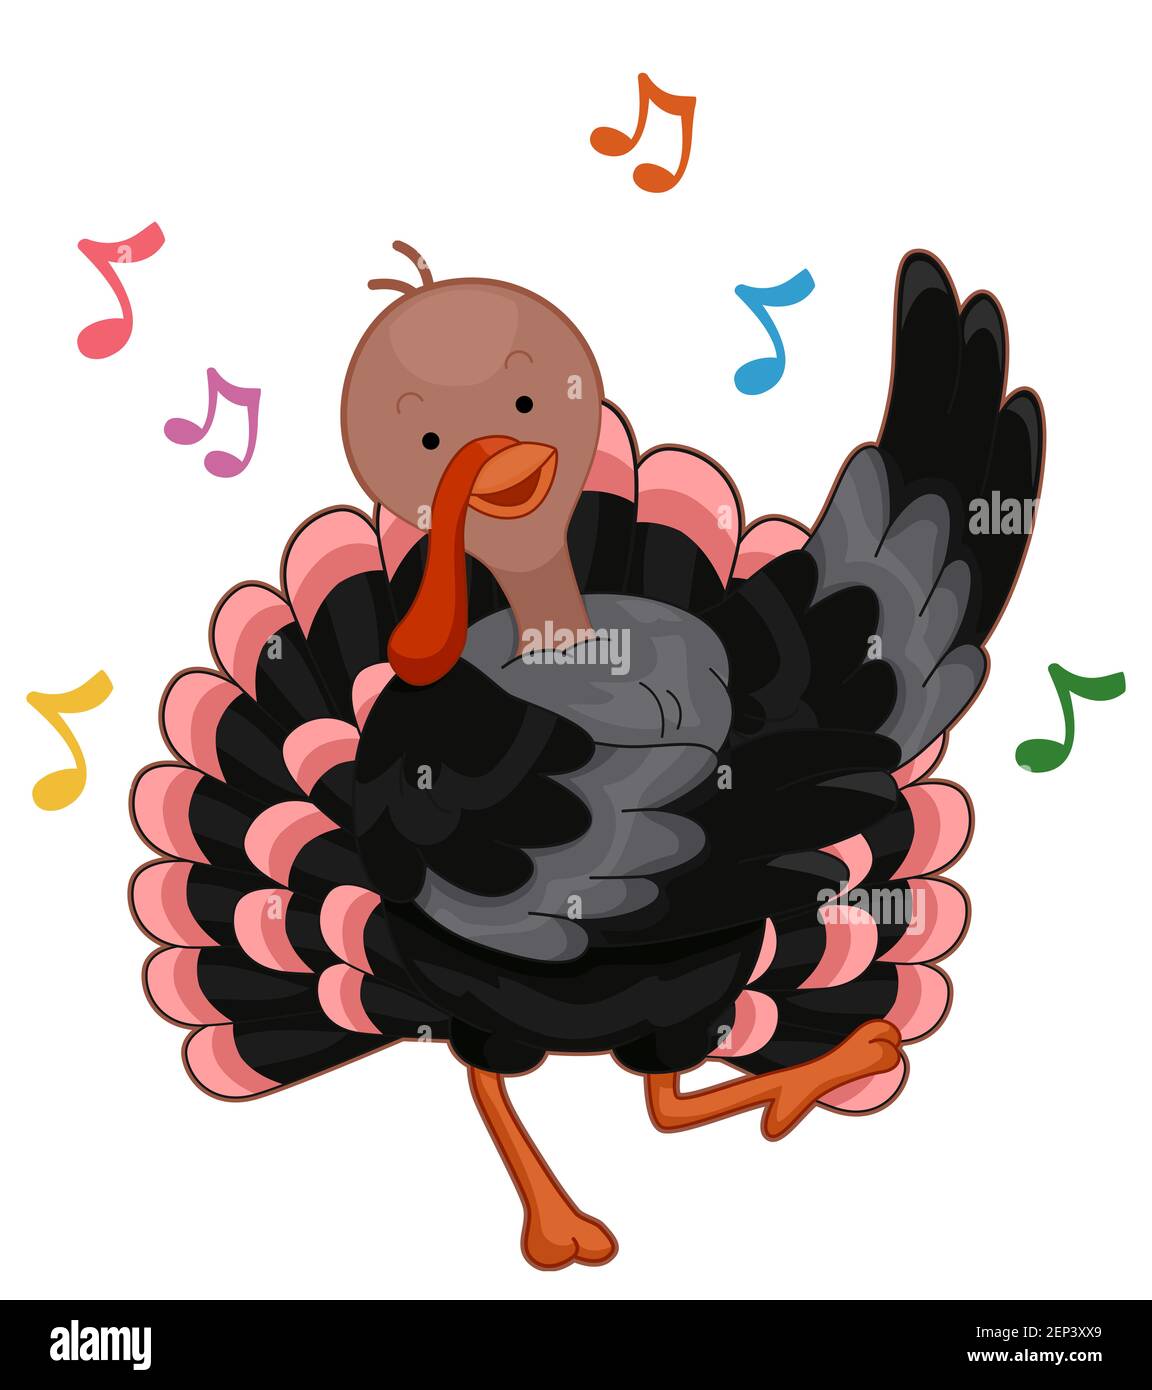 Illustration of a Turkey Mascot with a Wing Up Dancing to Music Stock Photo